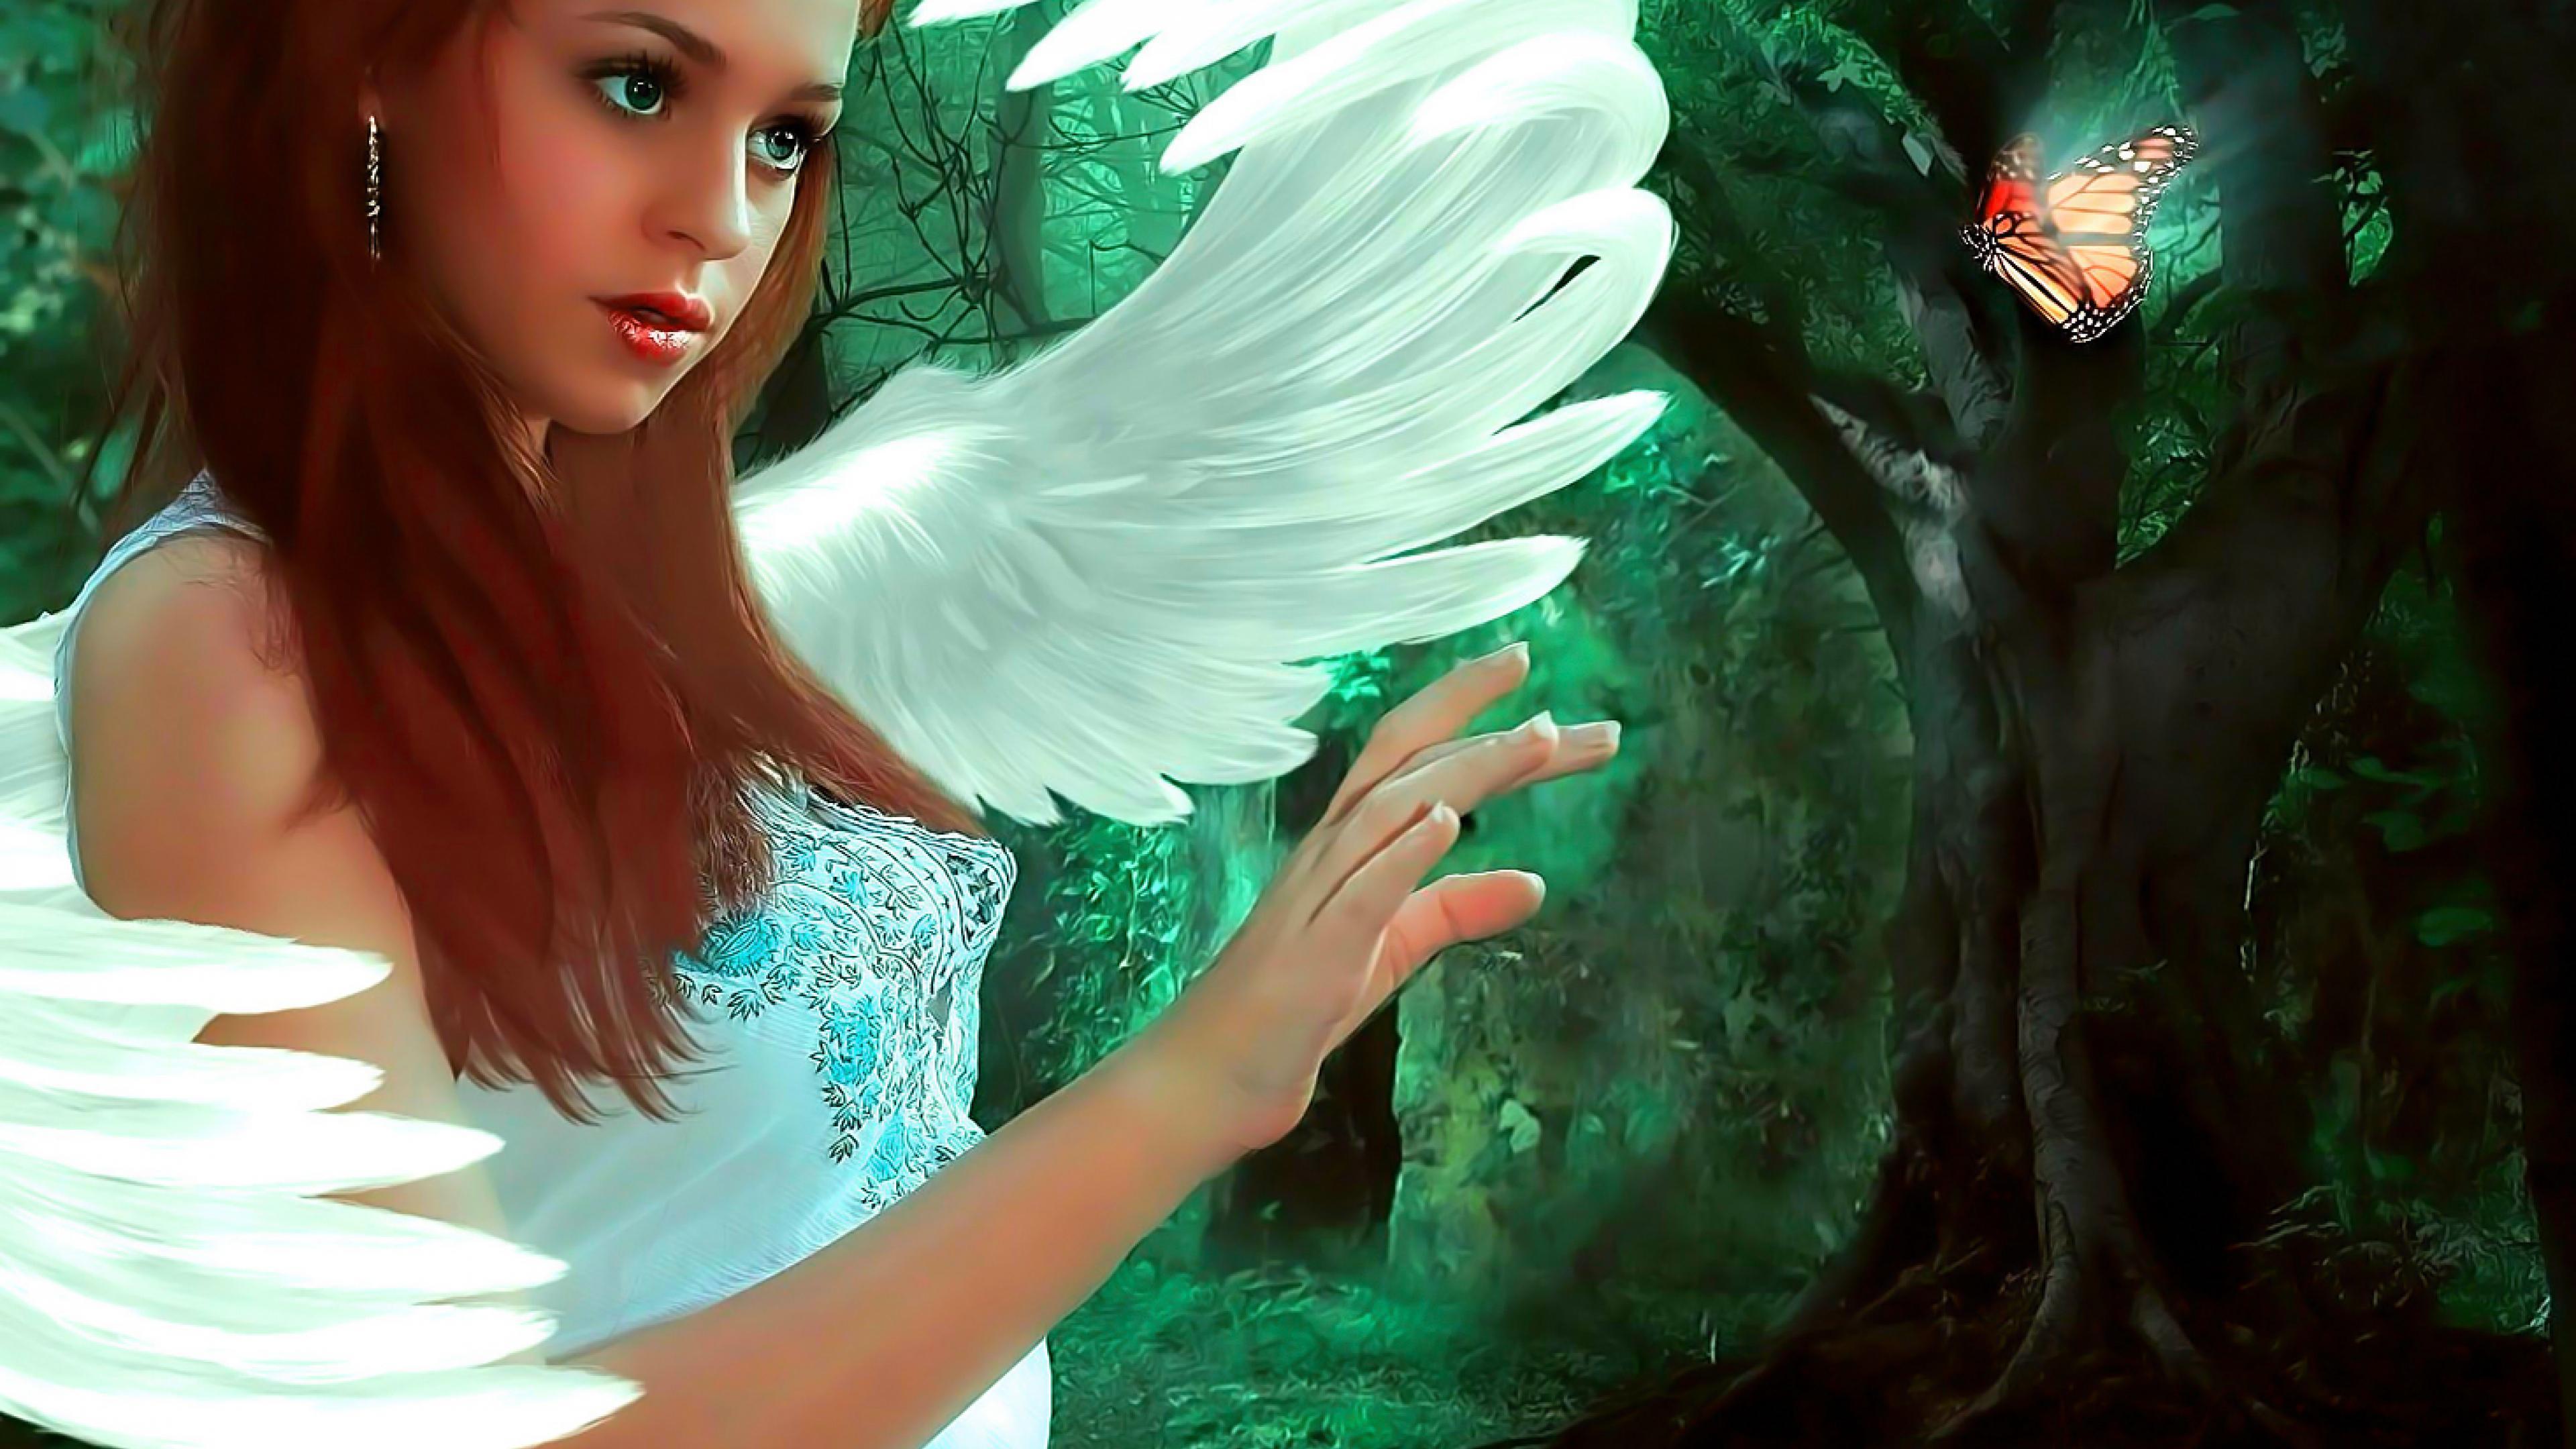 Touch Of A Butterfly Magical Fantasy Angel Ultra 3840x2160 HD